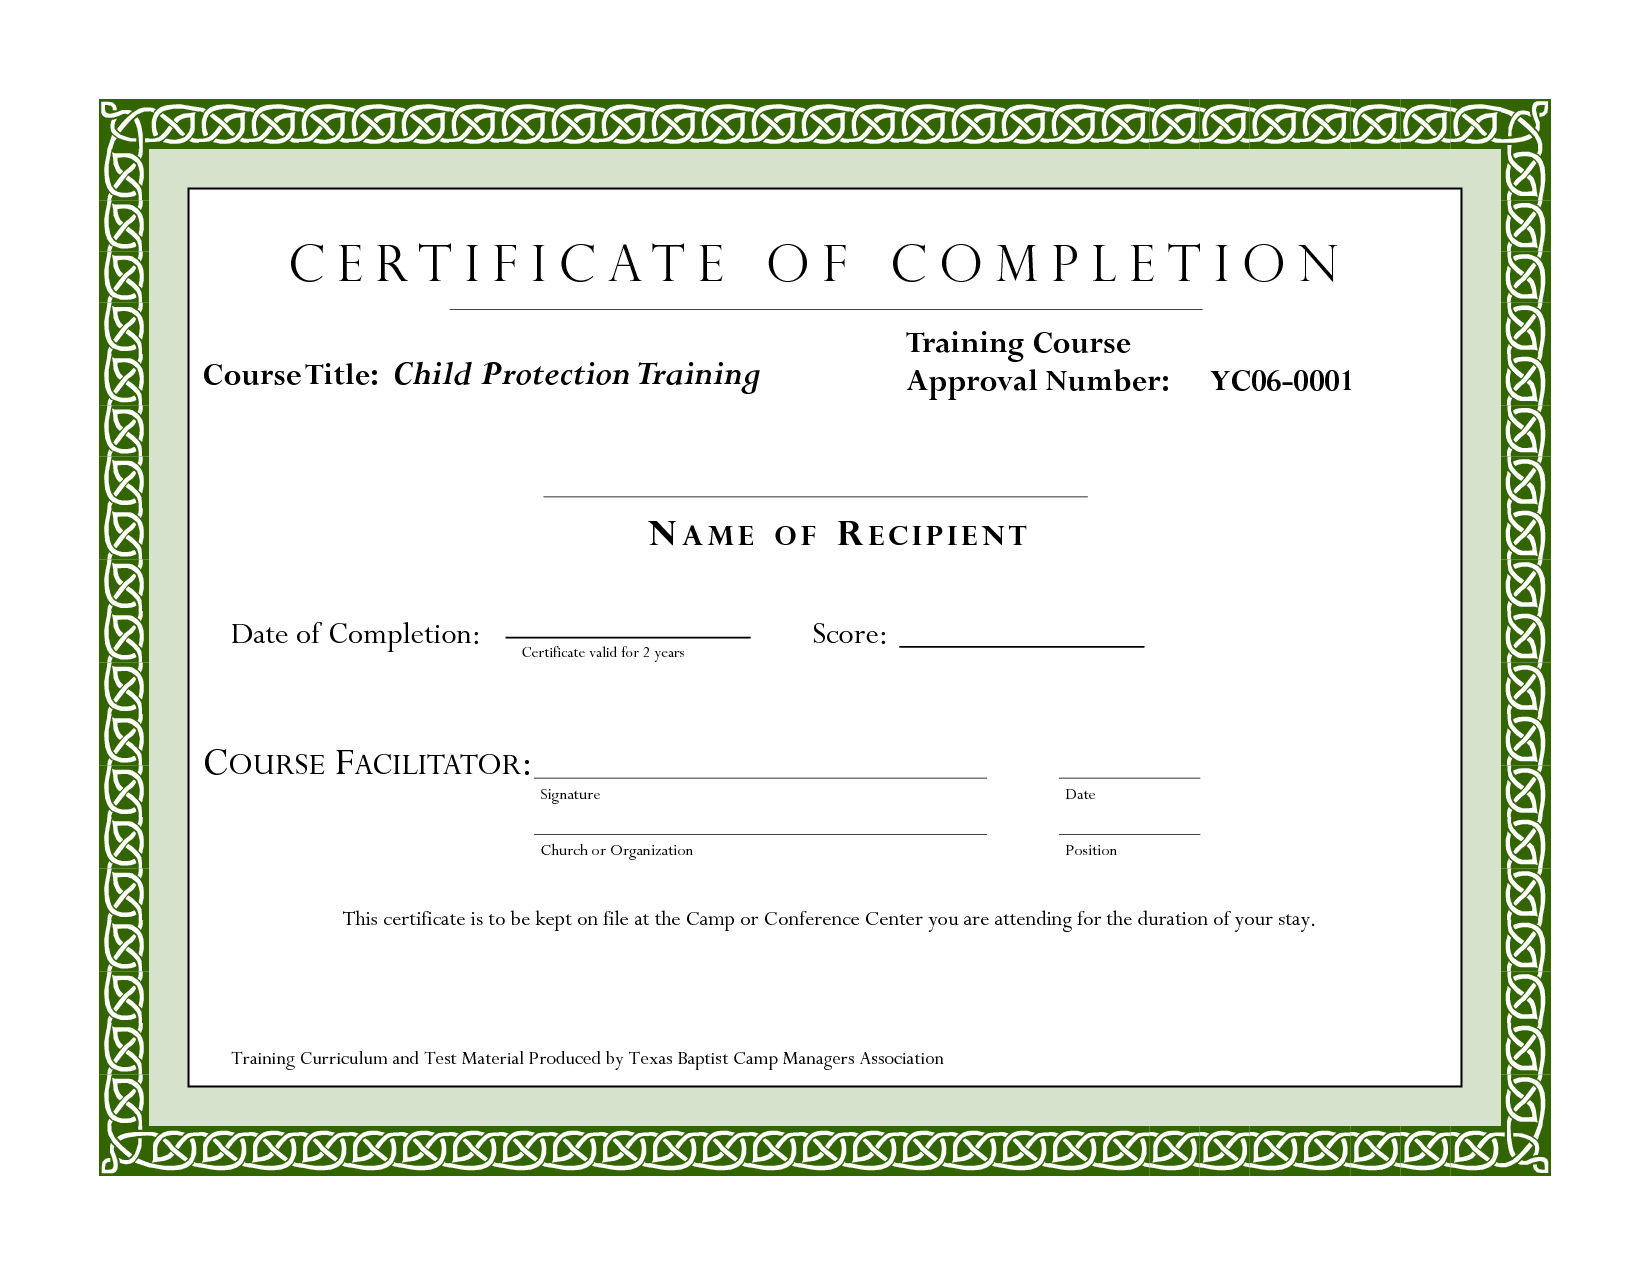 Course Completion Certificate Template | Certificate Of In Certificate Of Completion Template Word